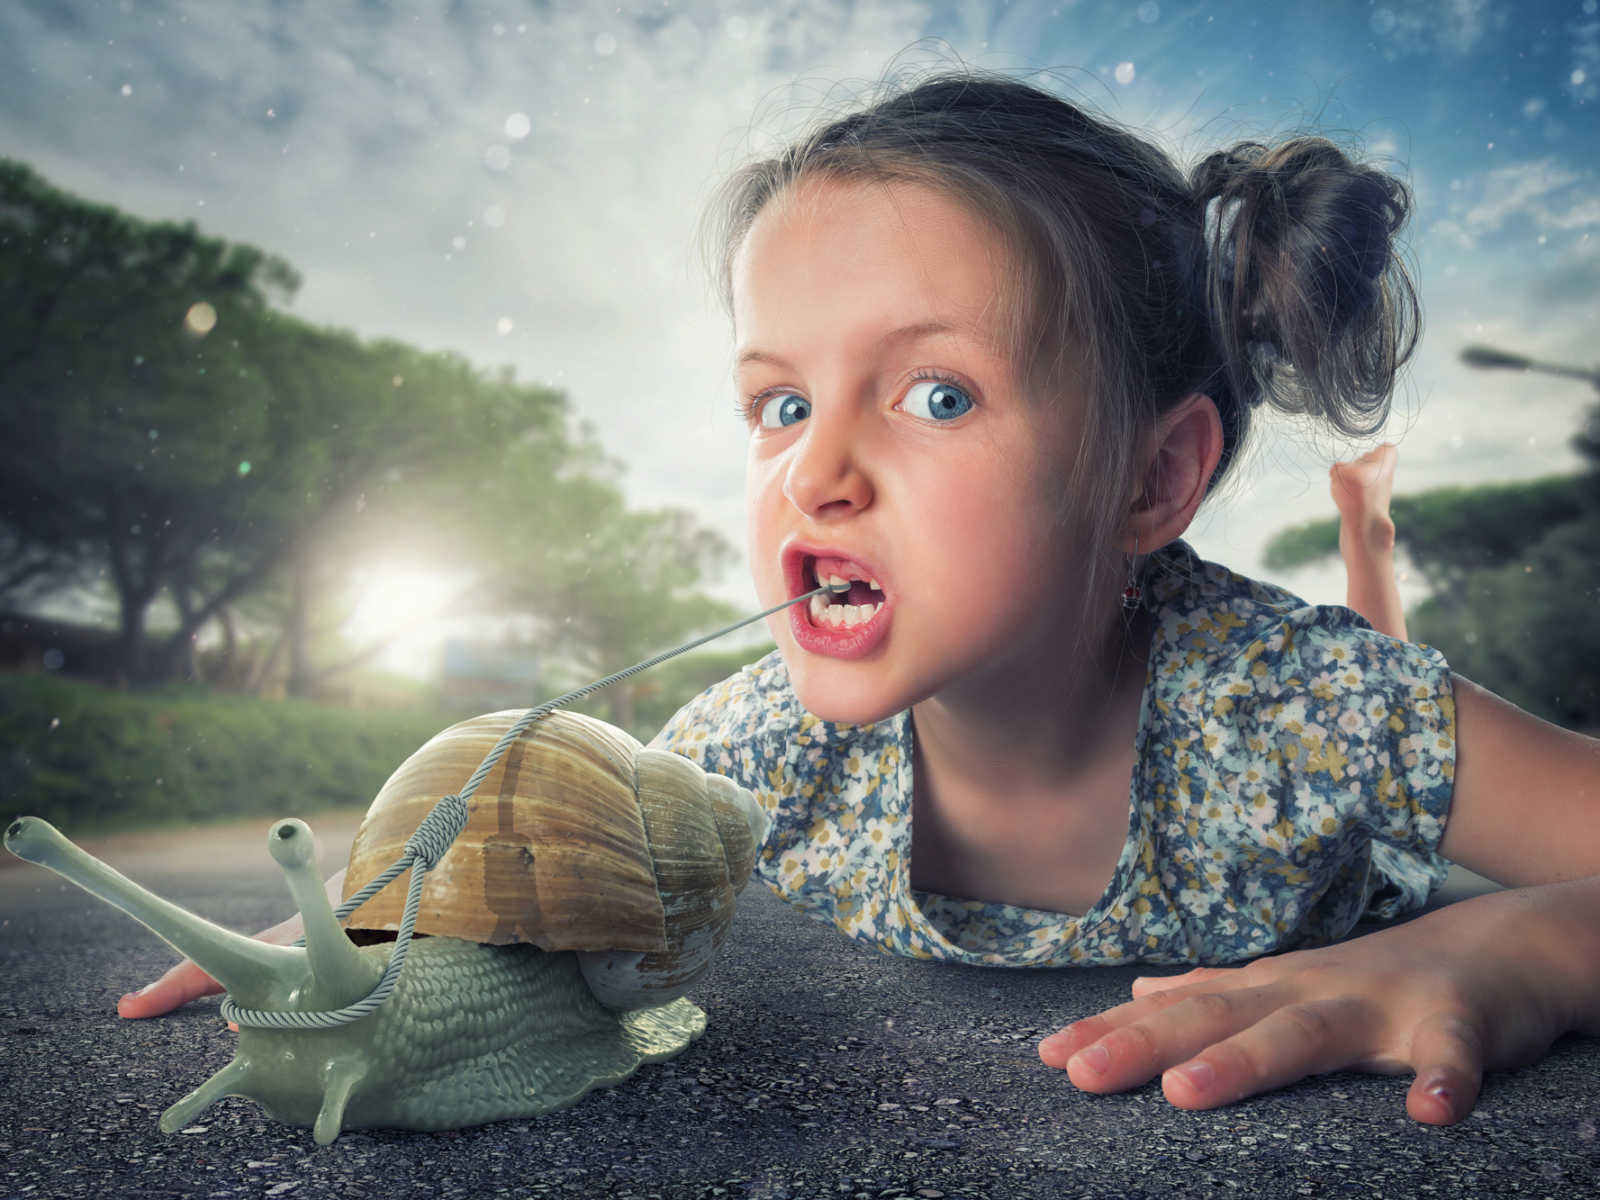 young girl with missing tooth lies on the street with rope leash in mouth that is connected to animated snail